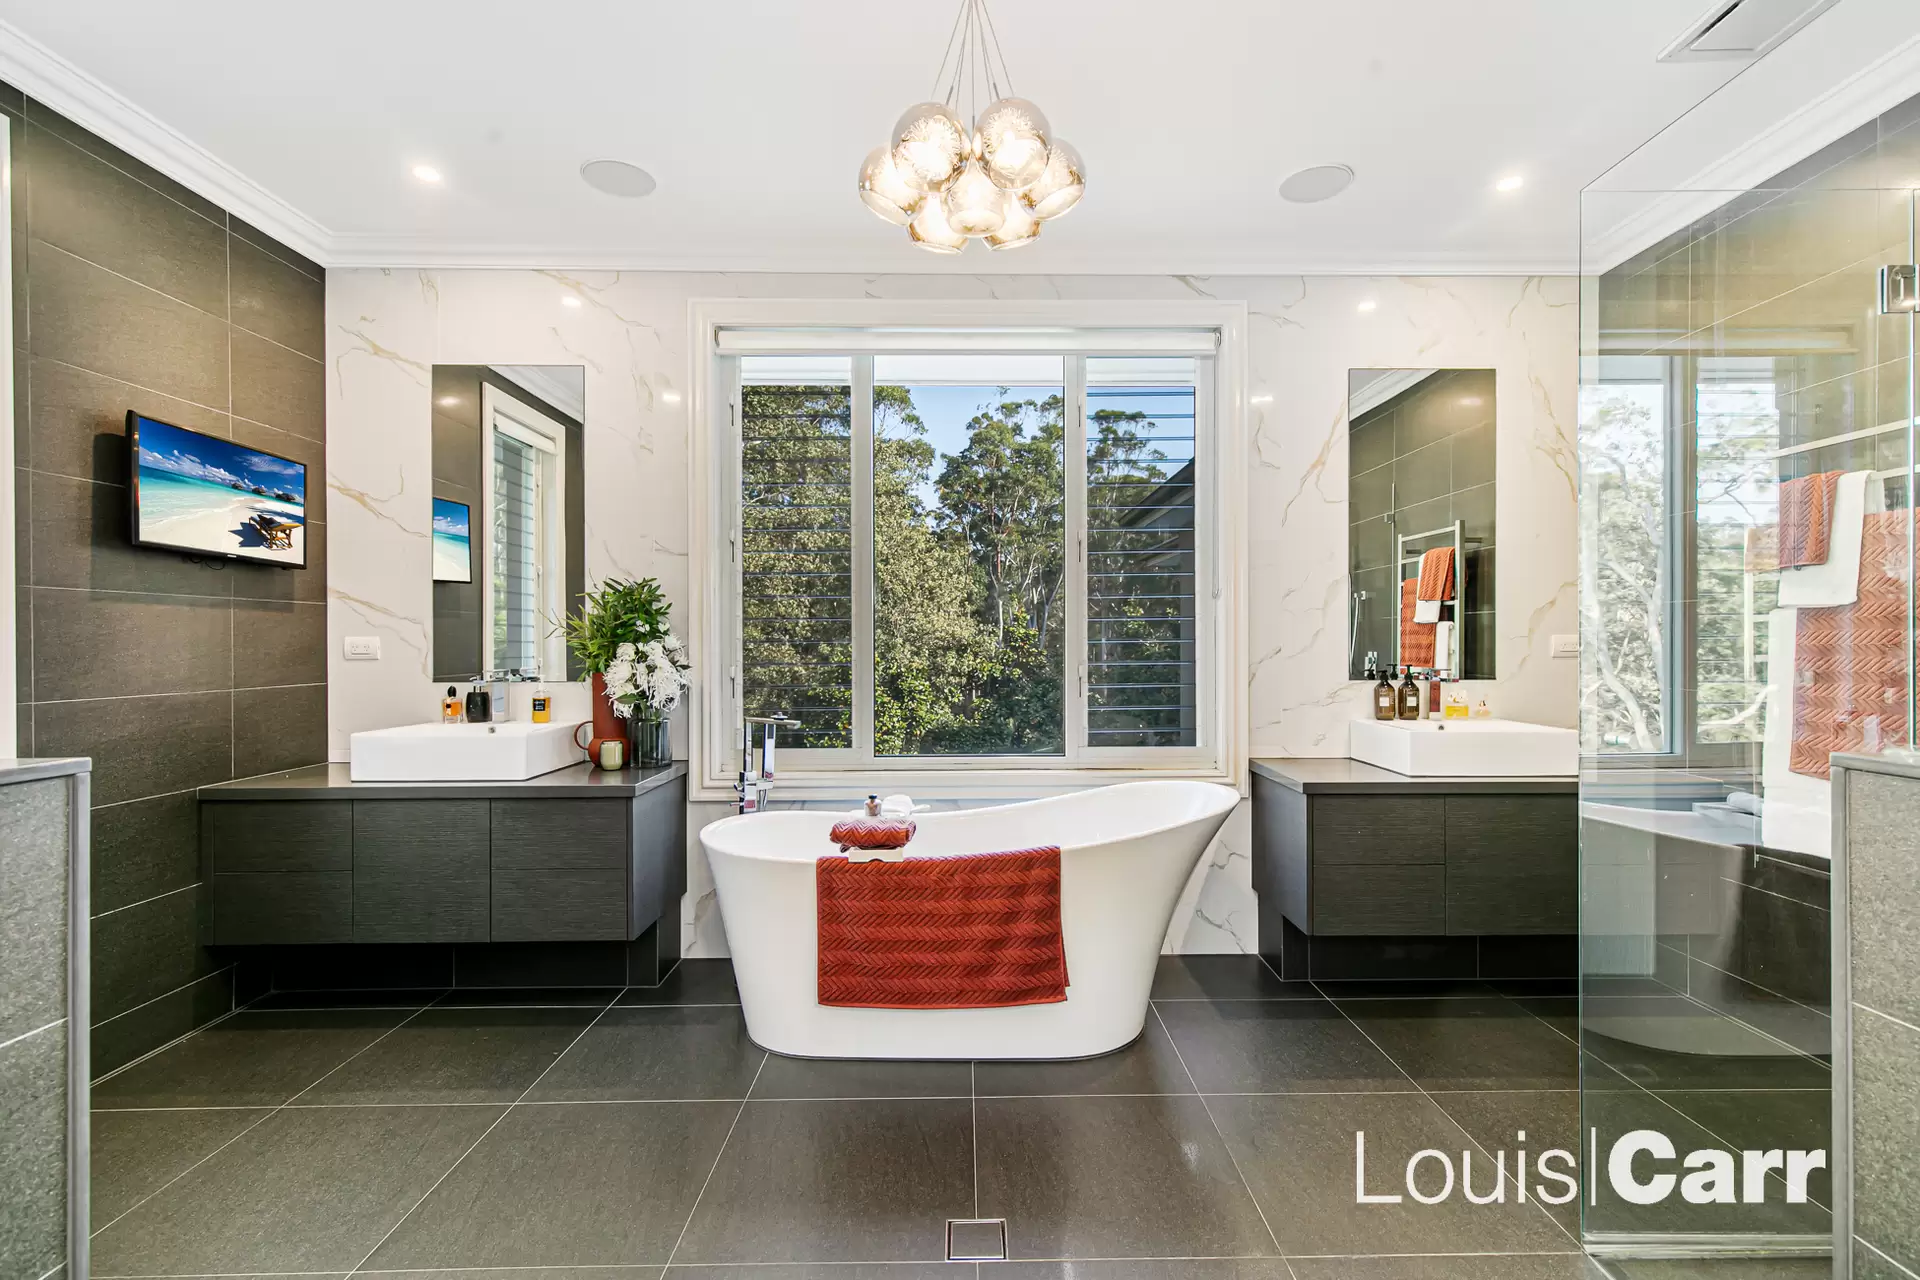 Photo #12: 10 Rodney Place, West Pennant Hills - Sold by Louis Carr Real Estate